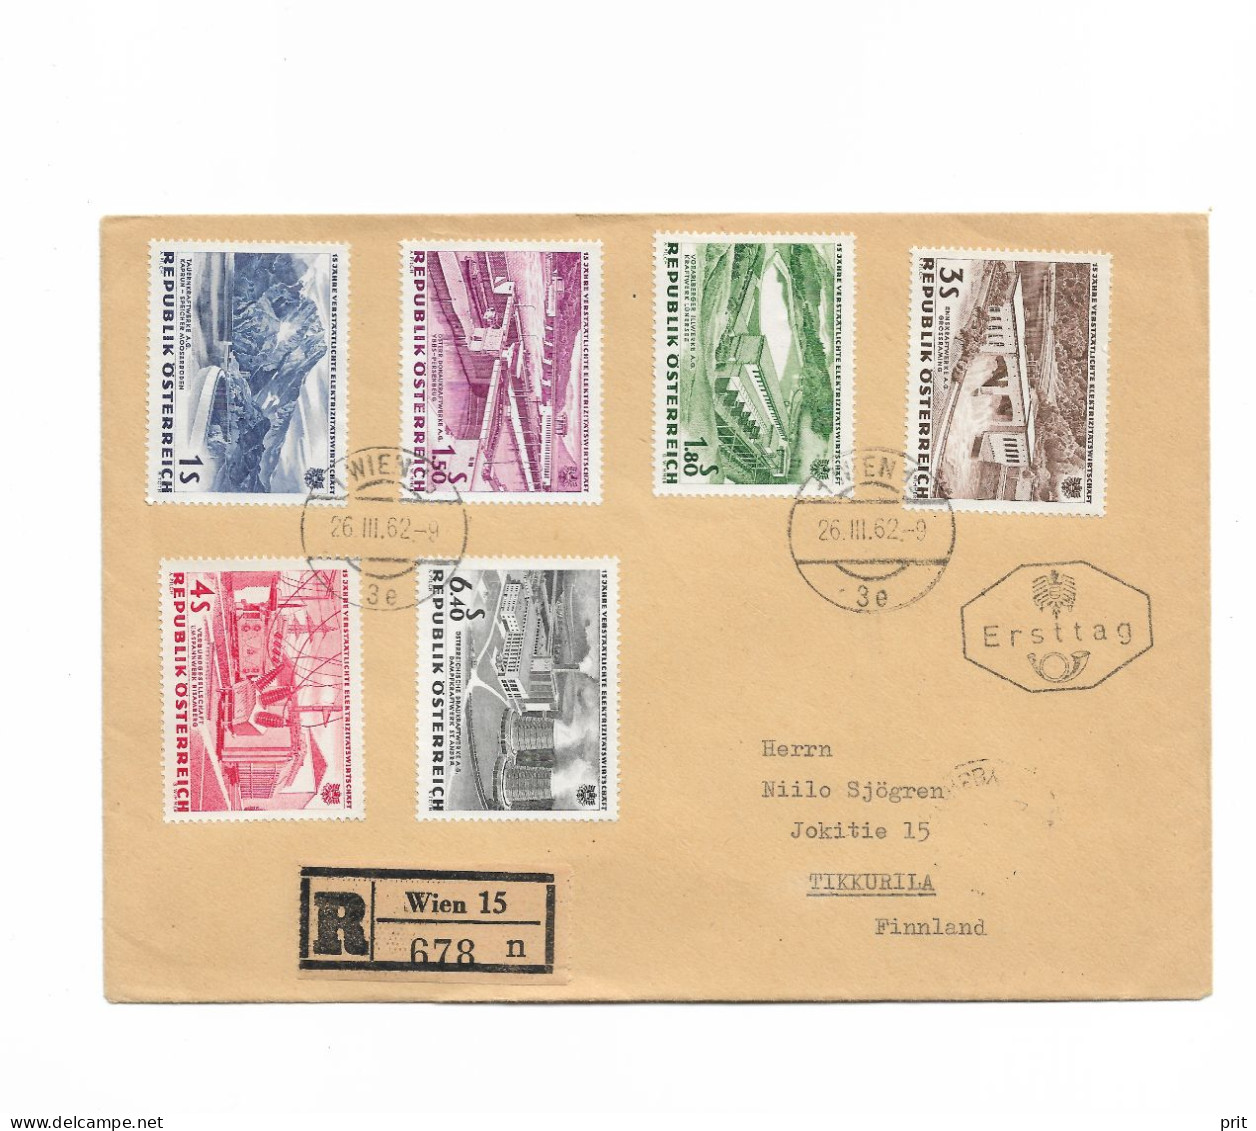 Vienna First Day Ersttag Registered Cover To Tikkurila Finland 1962  15 Years Of Nationalized Electricity Industry FDC - FDC